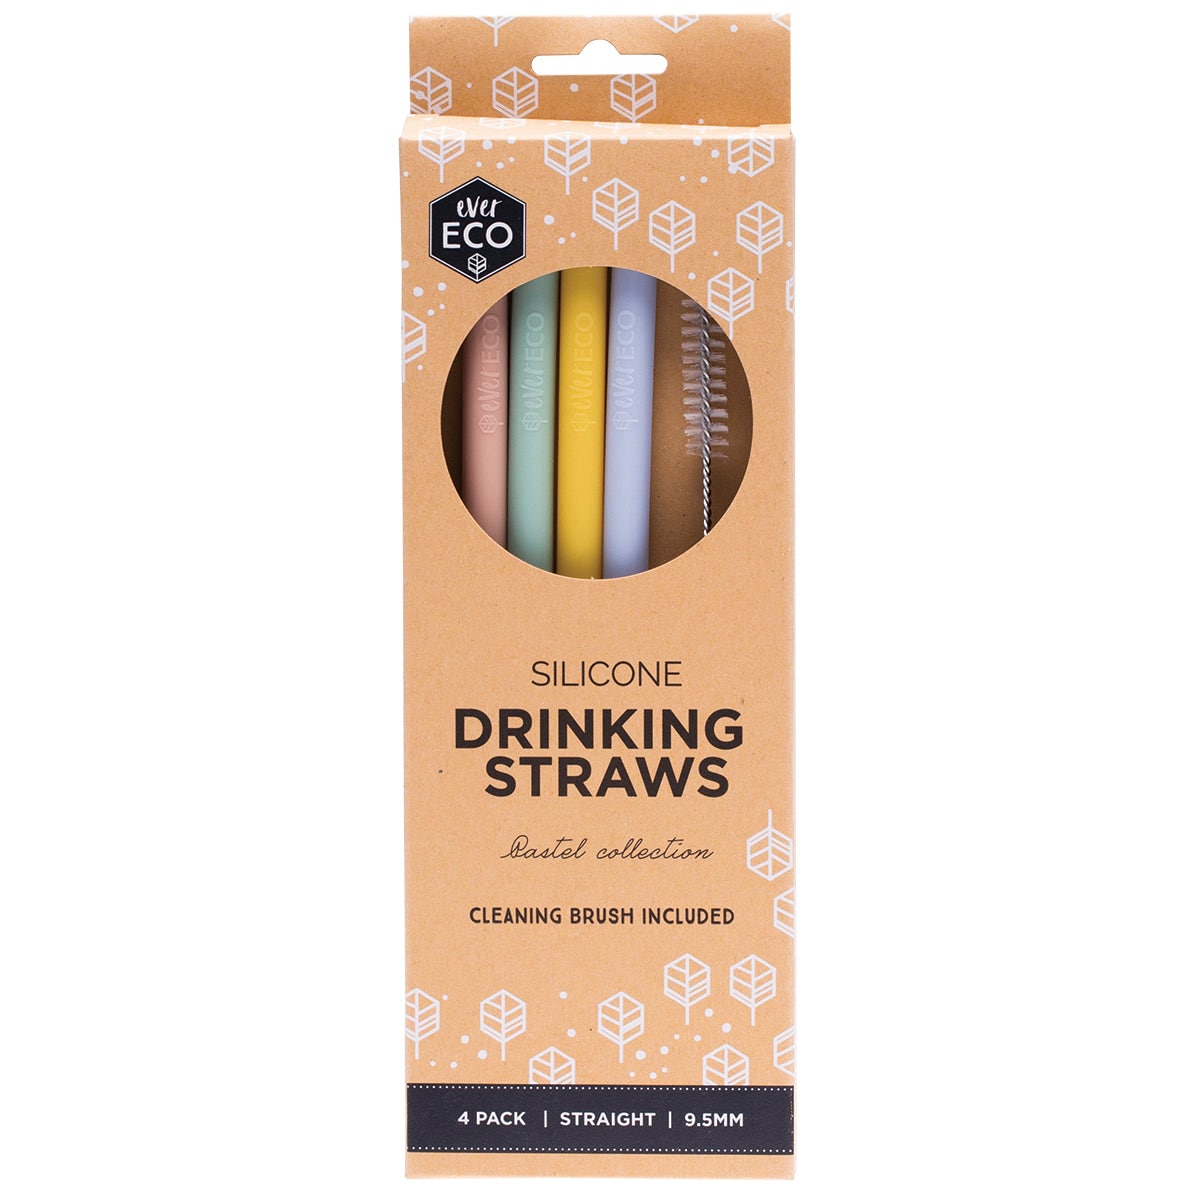 Ever Eco Silicone Drinking Straws Straight Pastel Collection 4 Pack